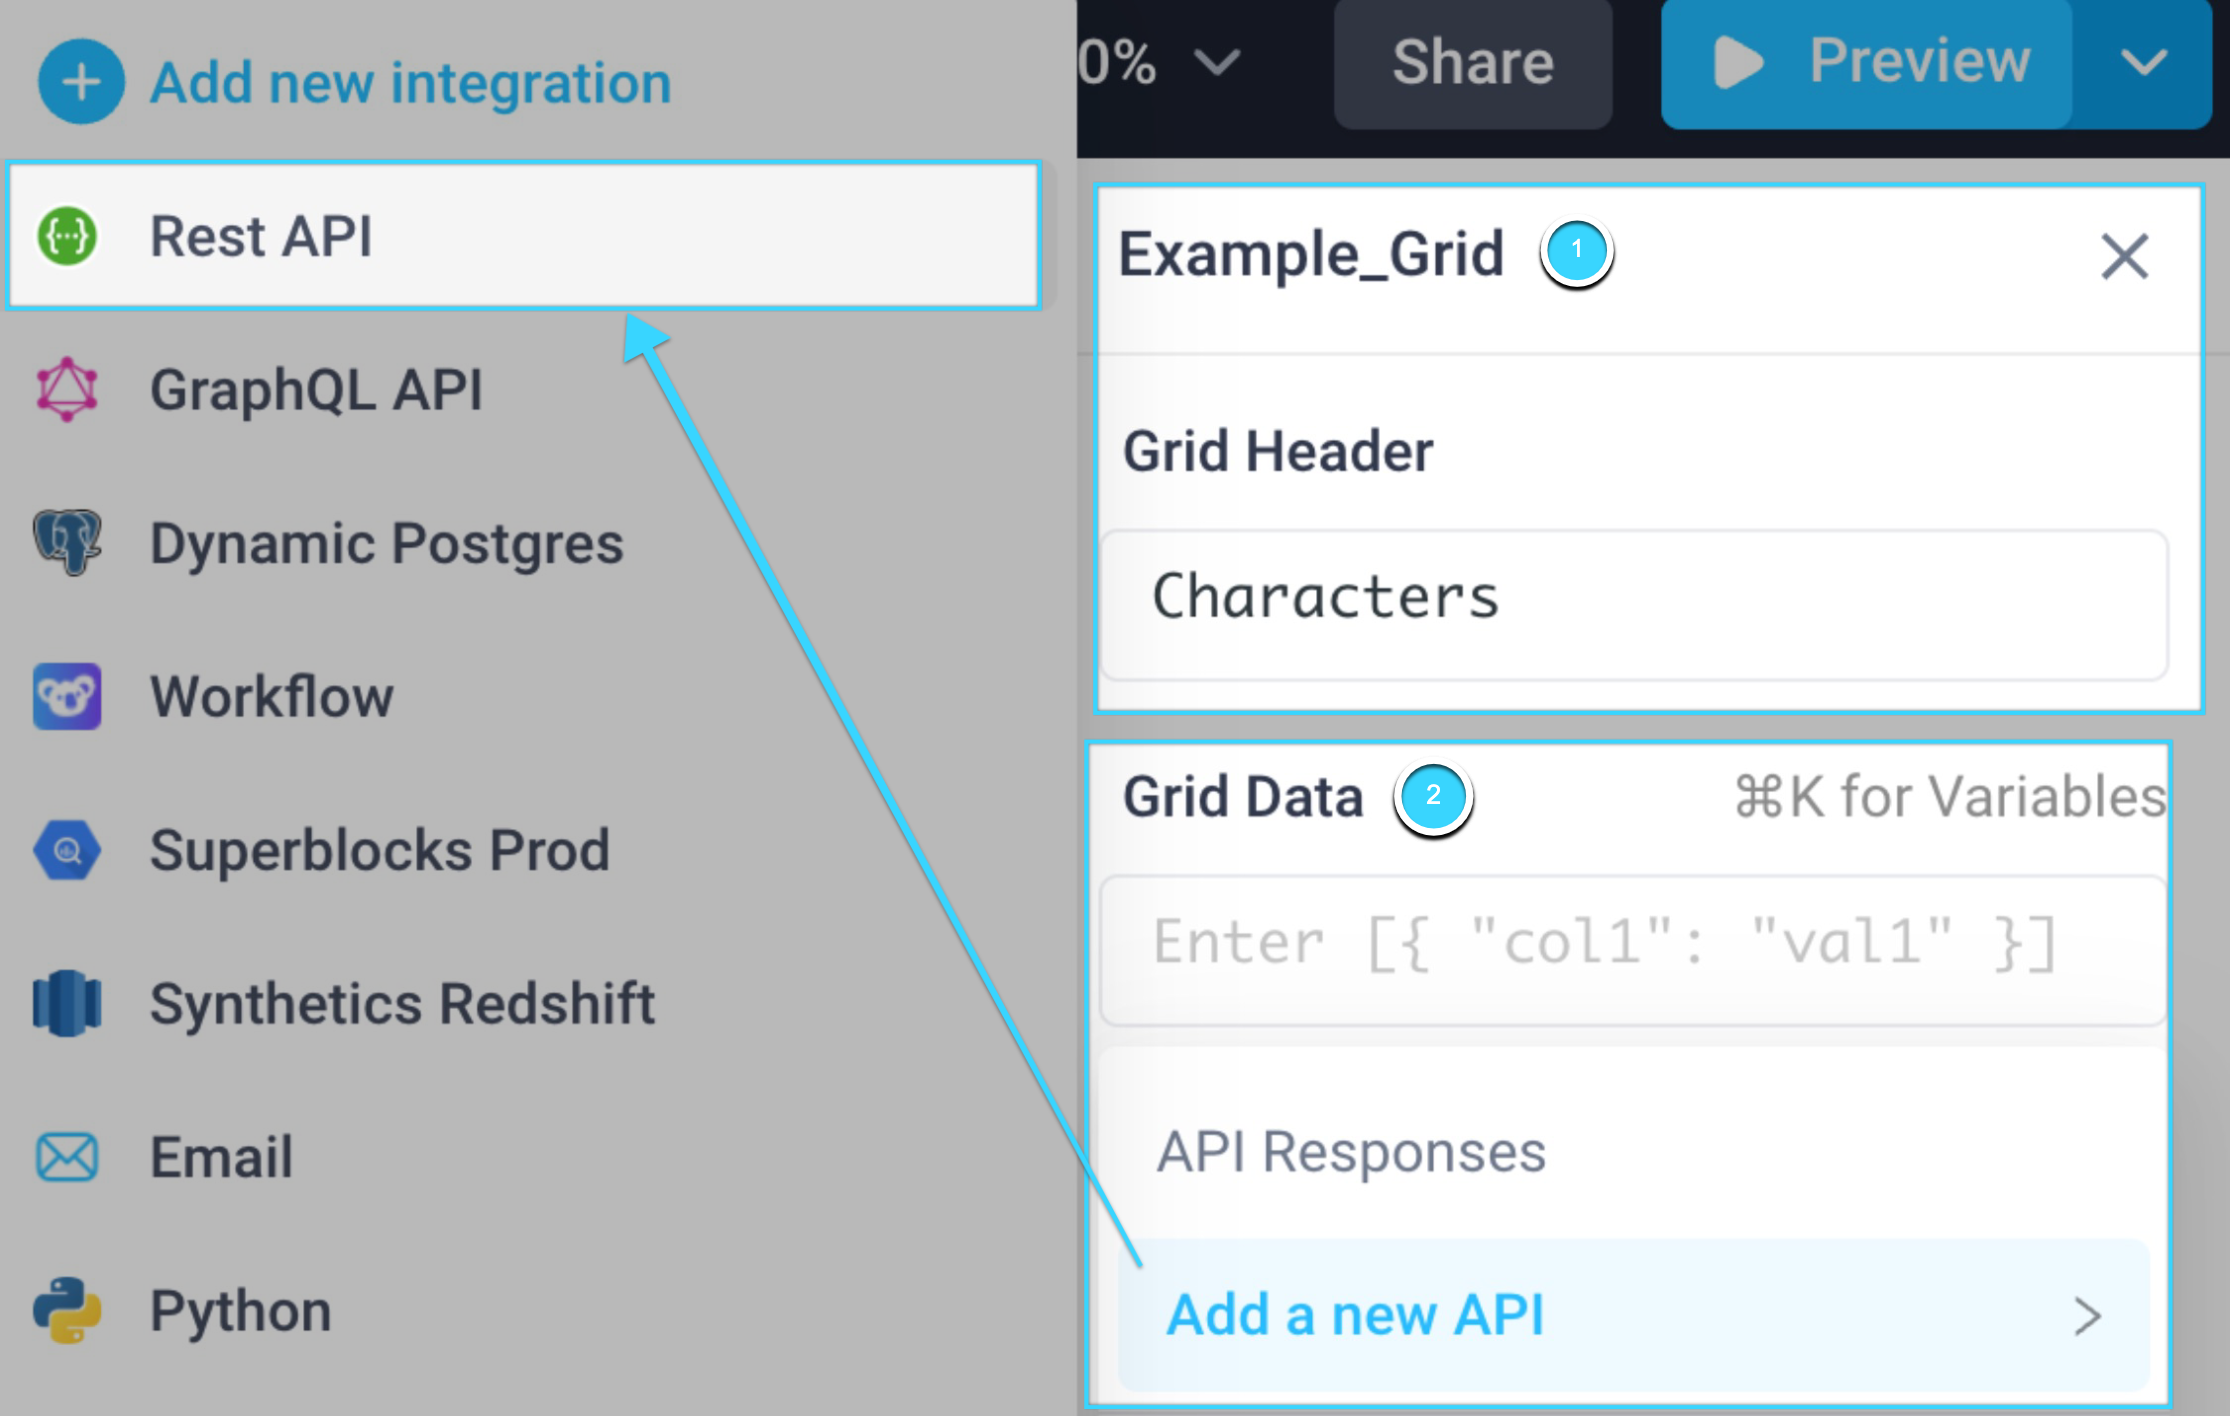 Add a new API from the grid data